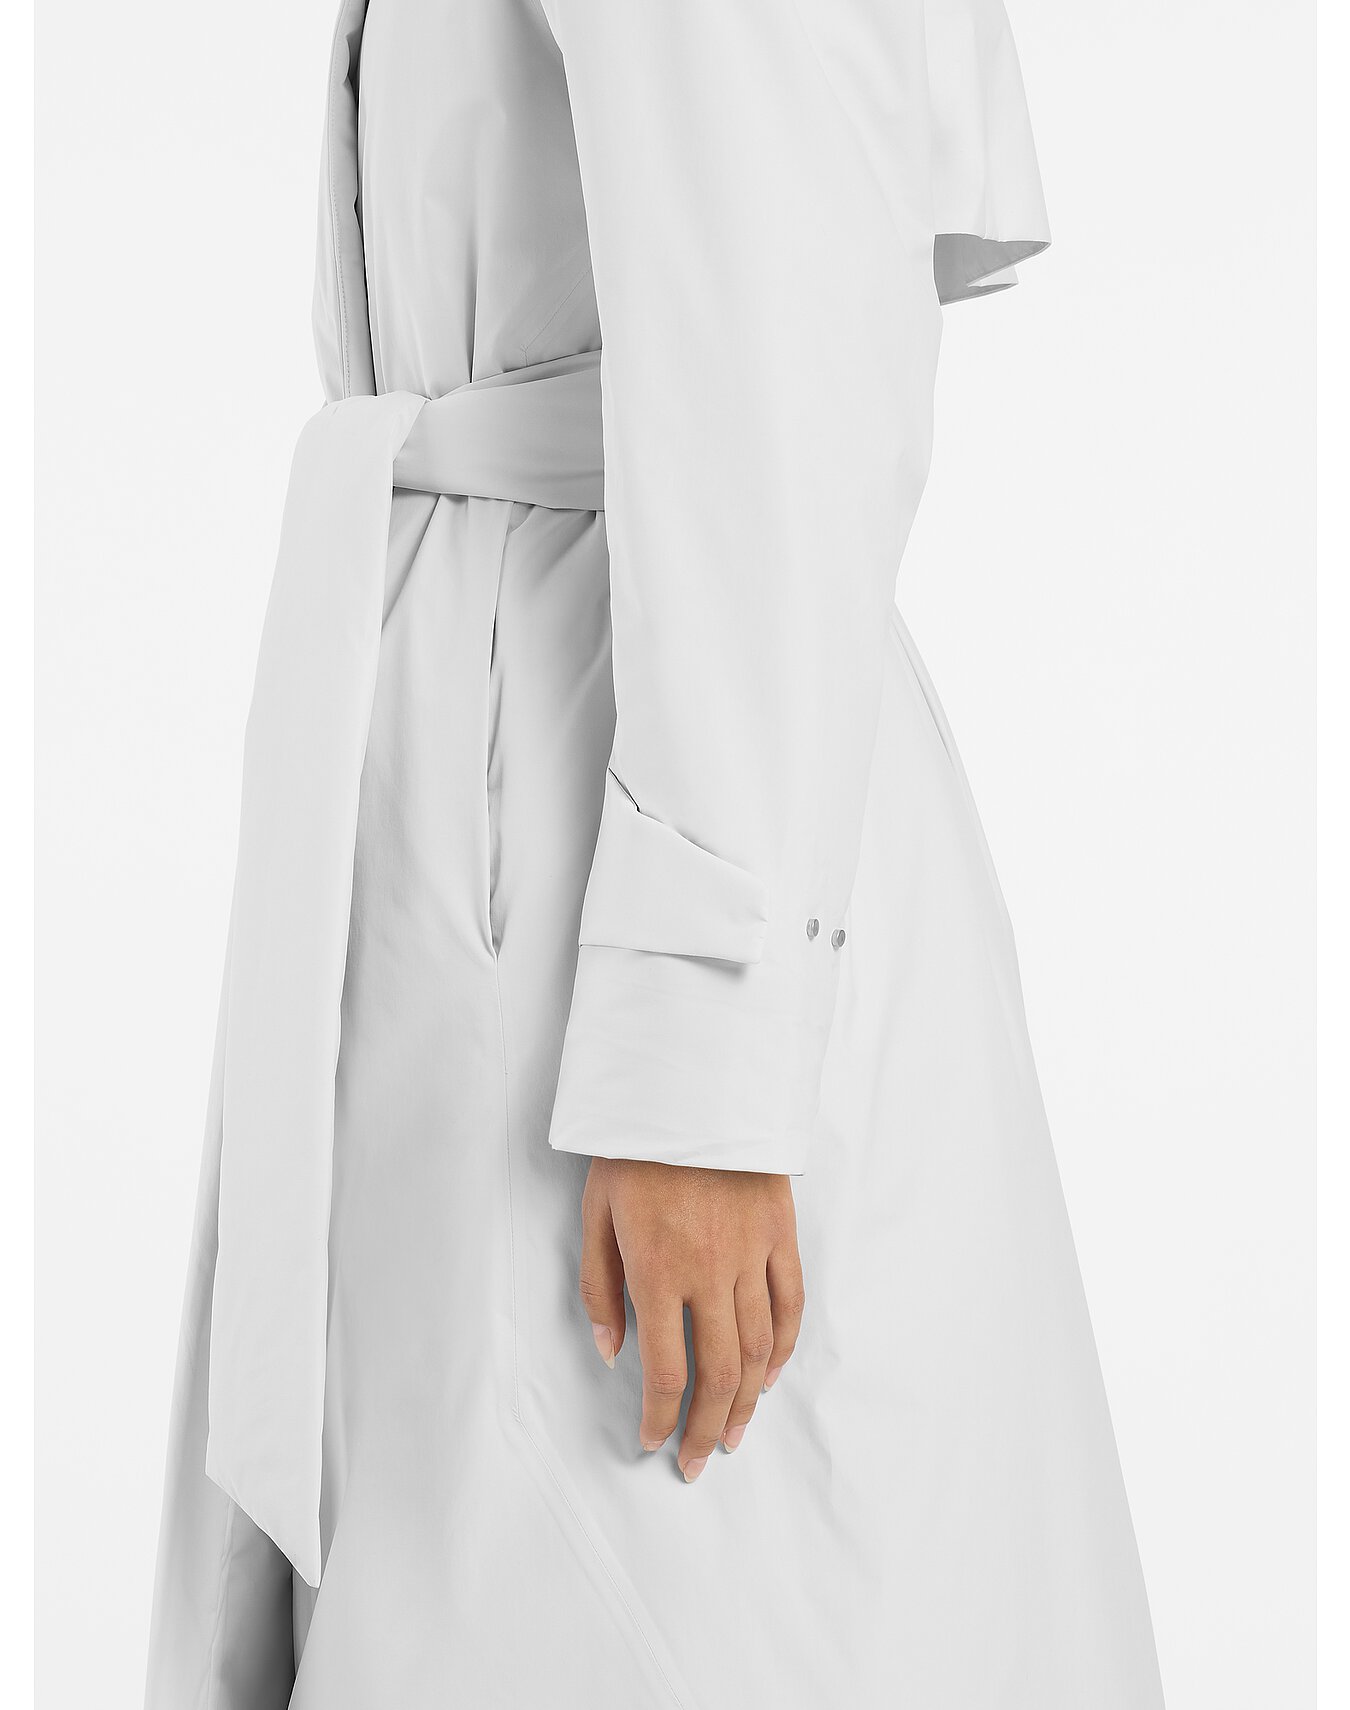 Calea Insulated Trench Coat Women's | Arc'teryx Outlet